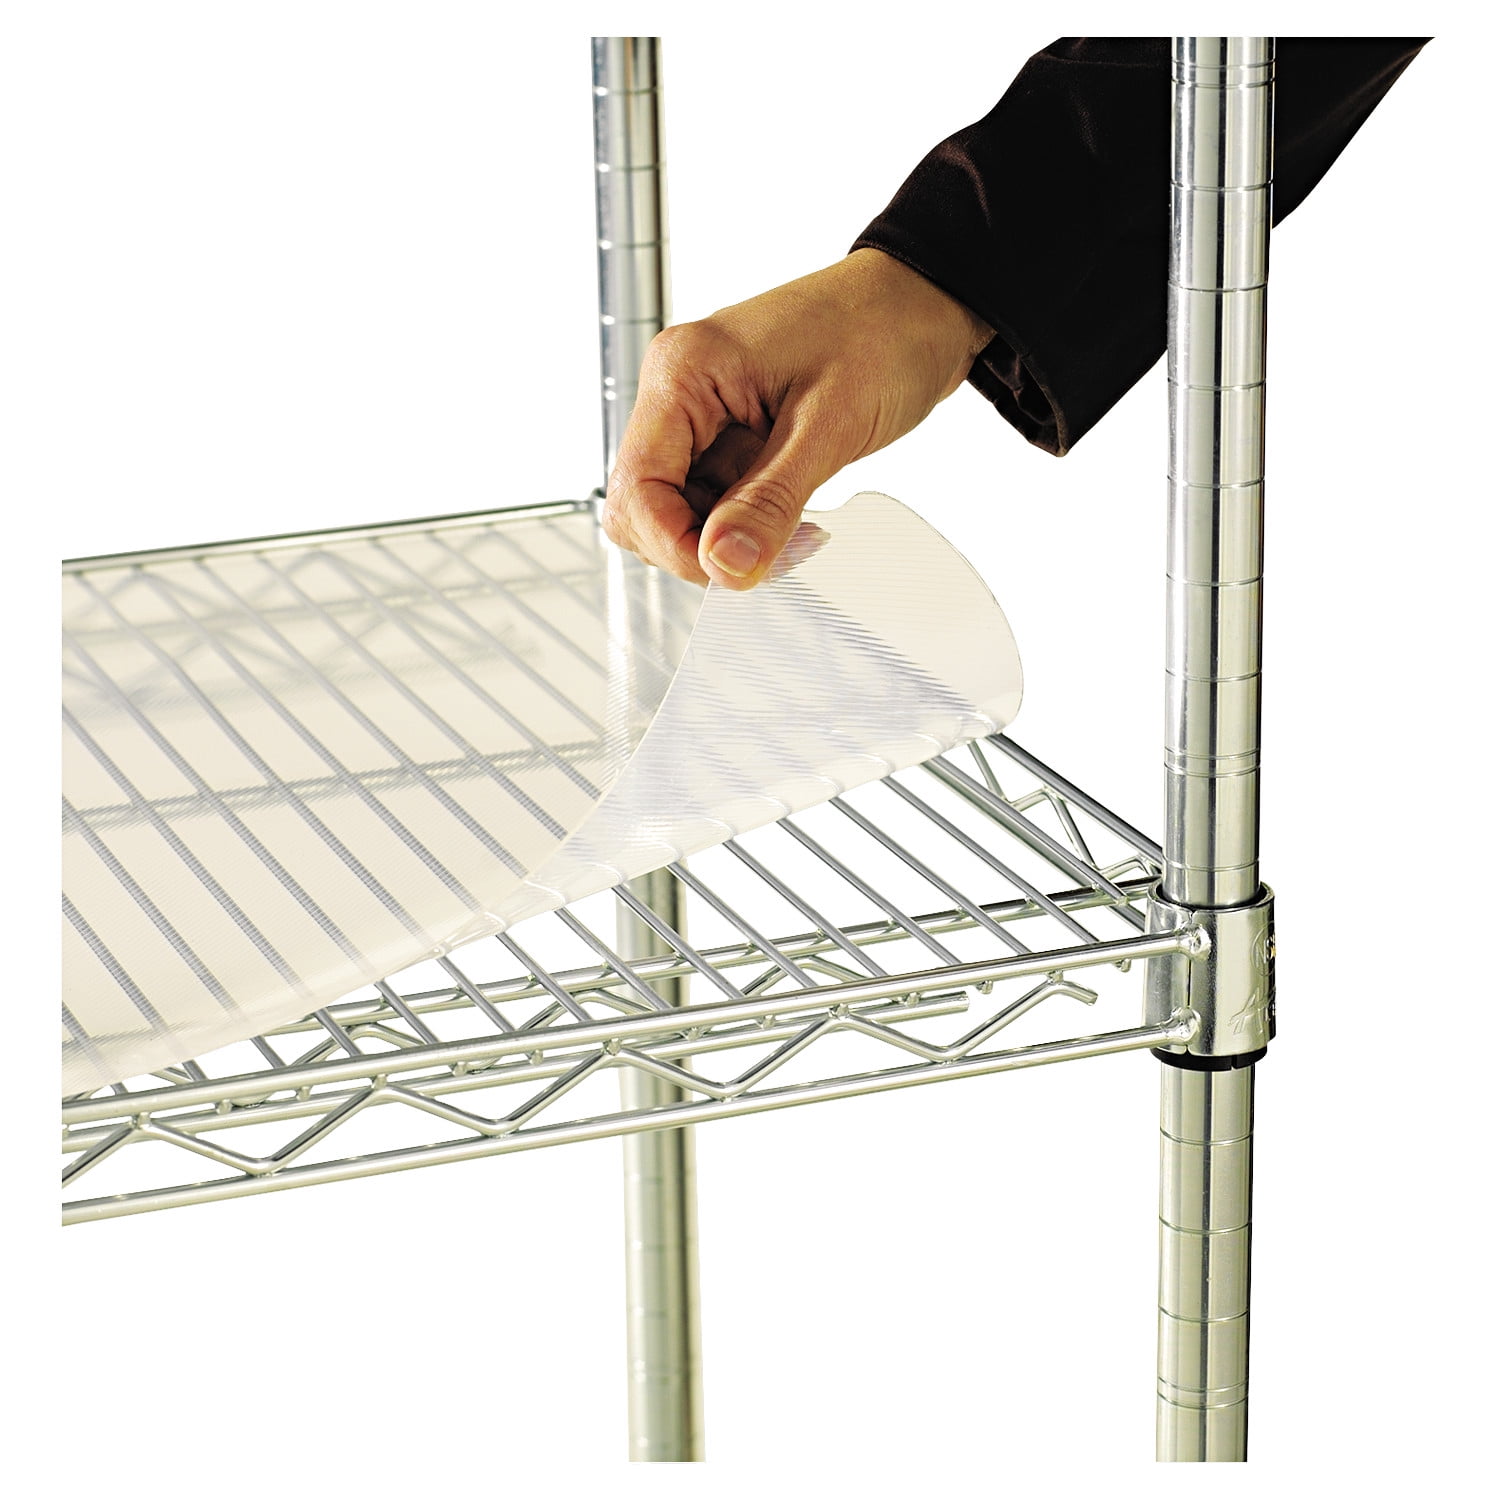 18" x 48" Opaque Wire Shelf Liners 4 Pack 